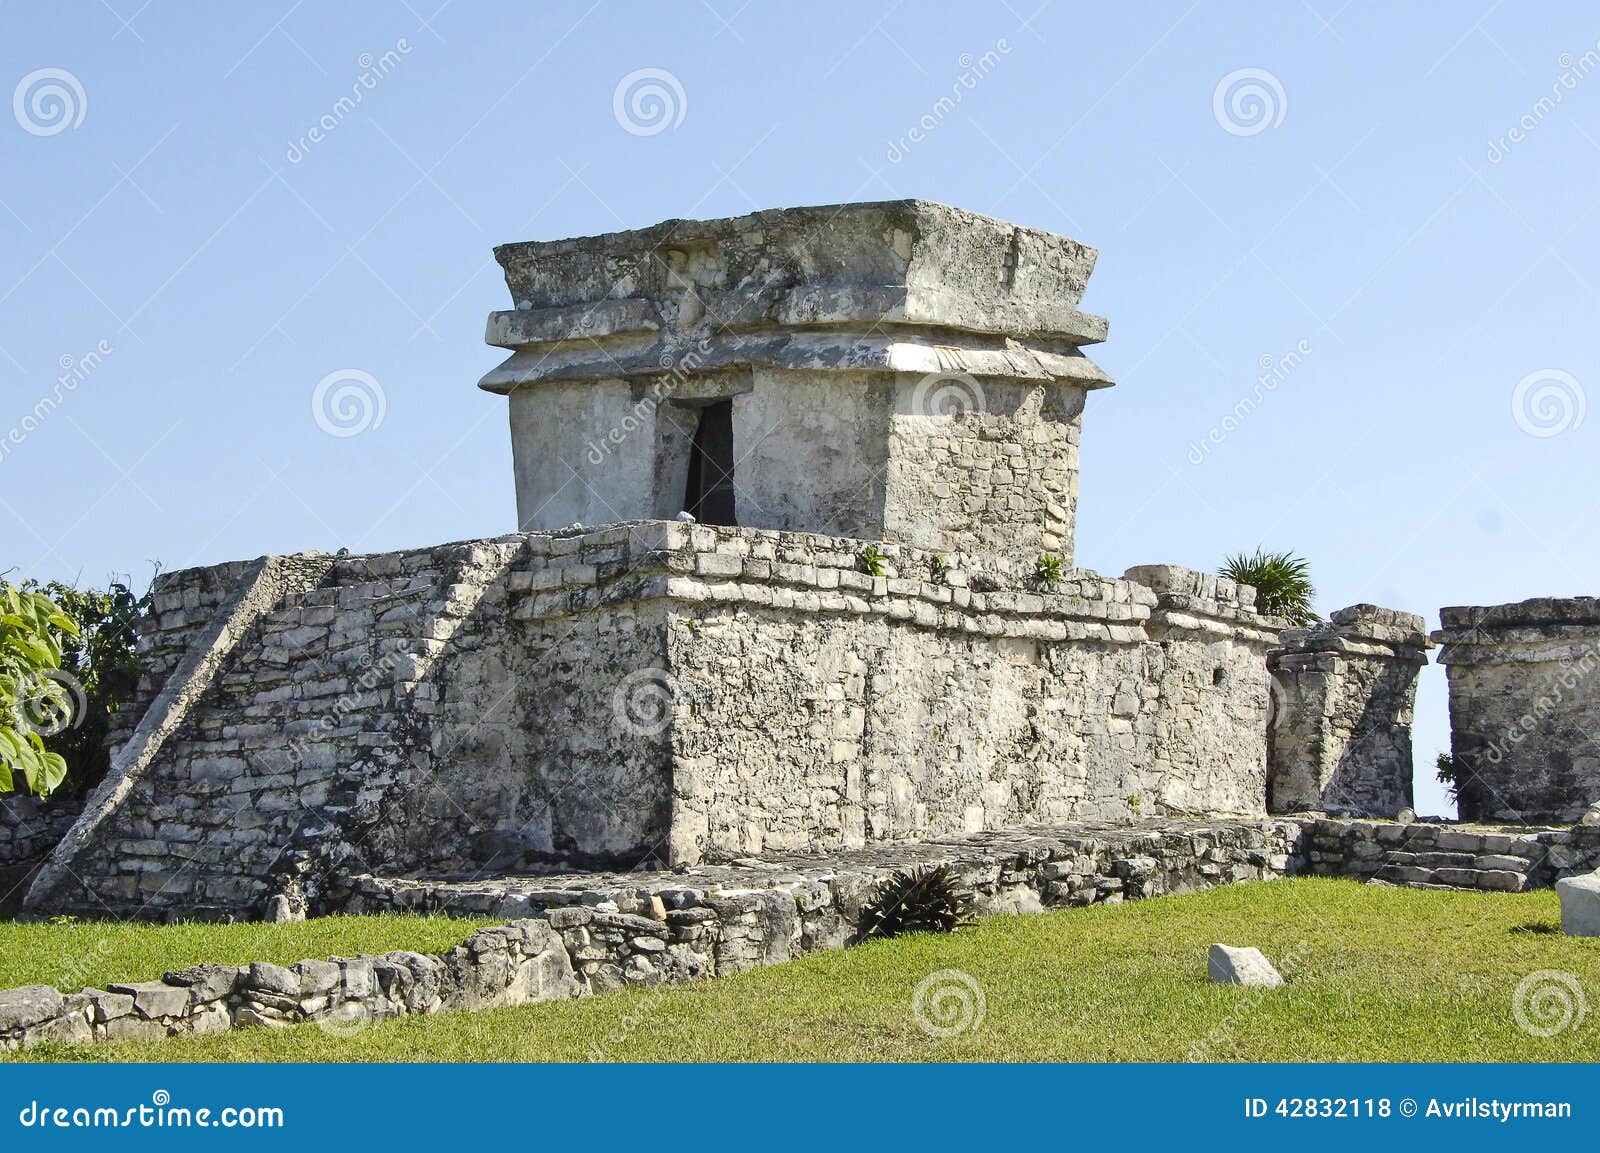 ancient buildings built by the mayas